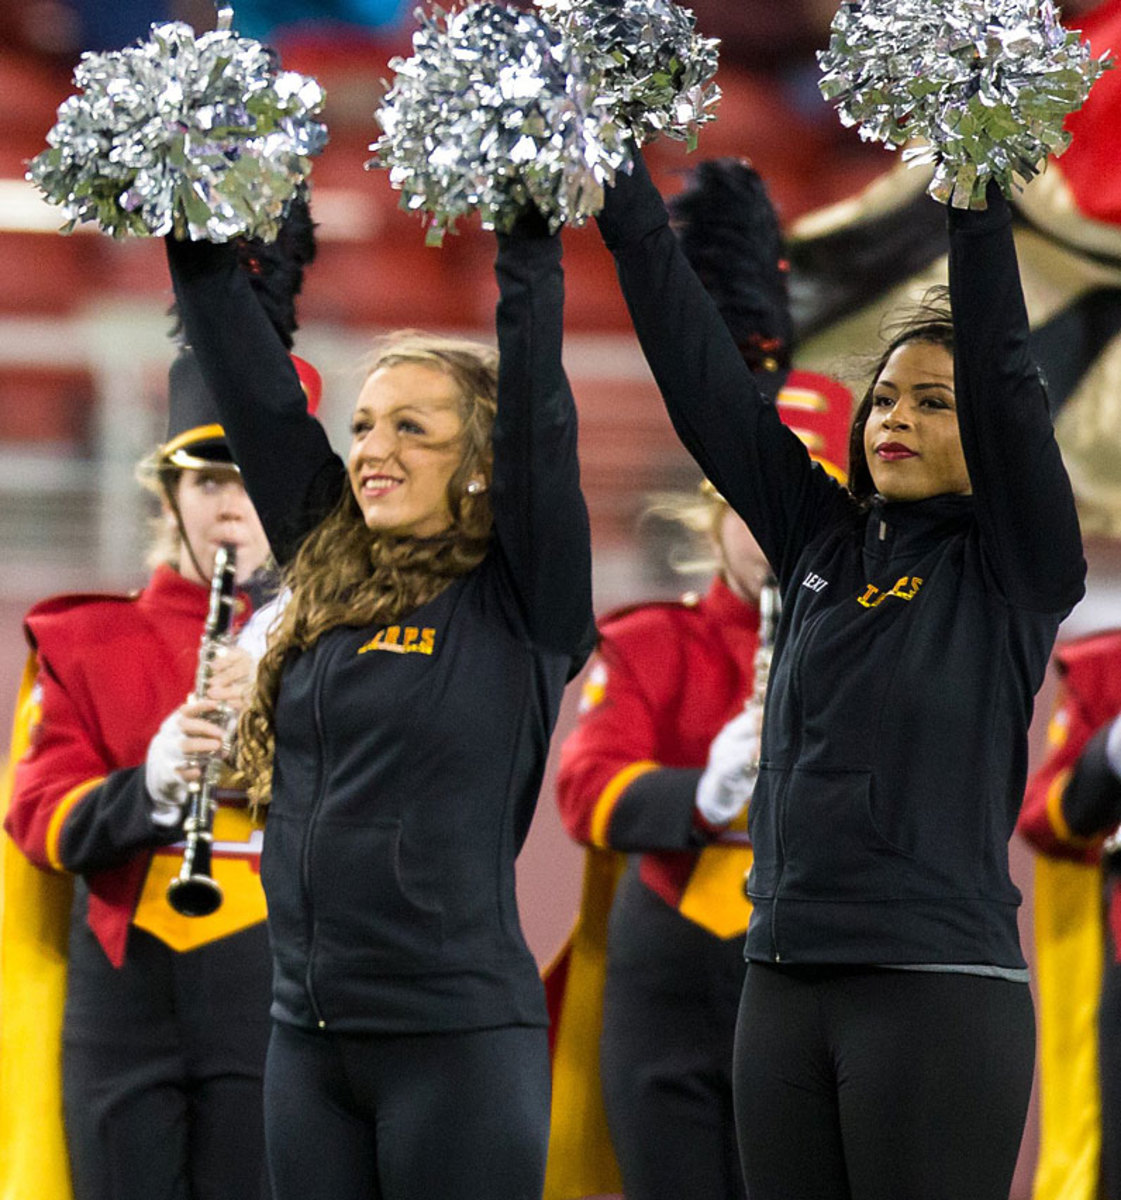 Foster-Farms-Bowl-Maryland-cheerleaders-CDT20141230057_maryland_at_Stanford.jpg